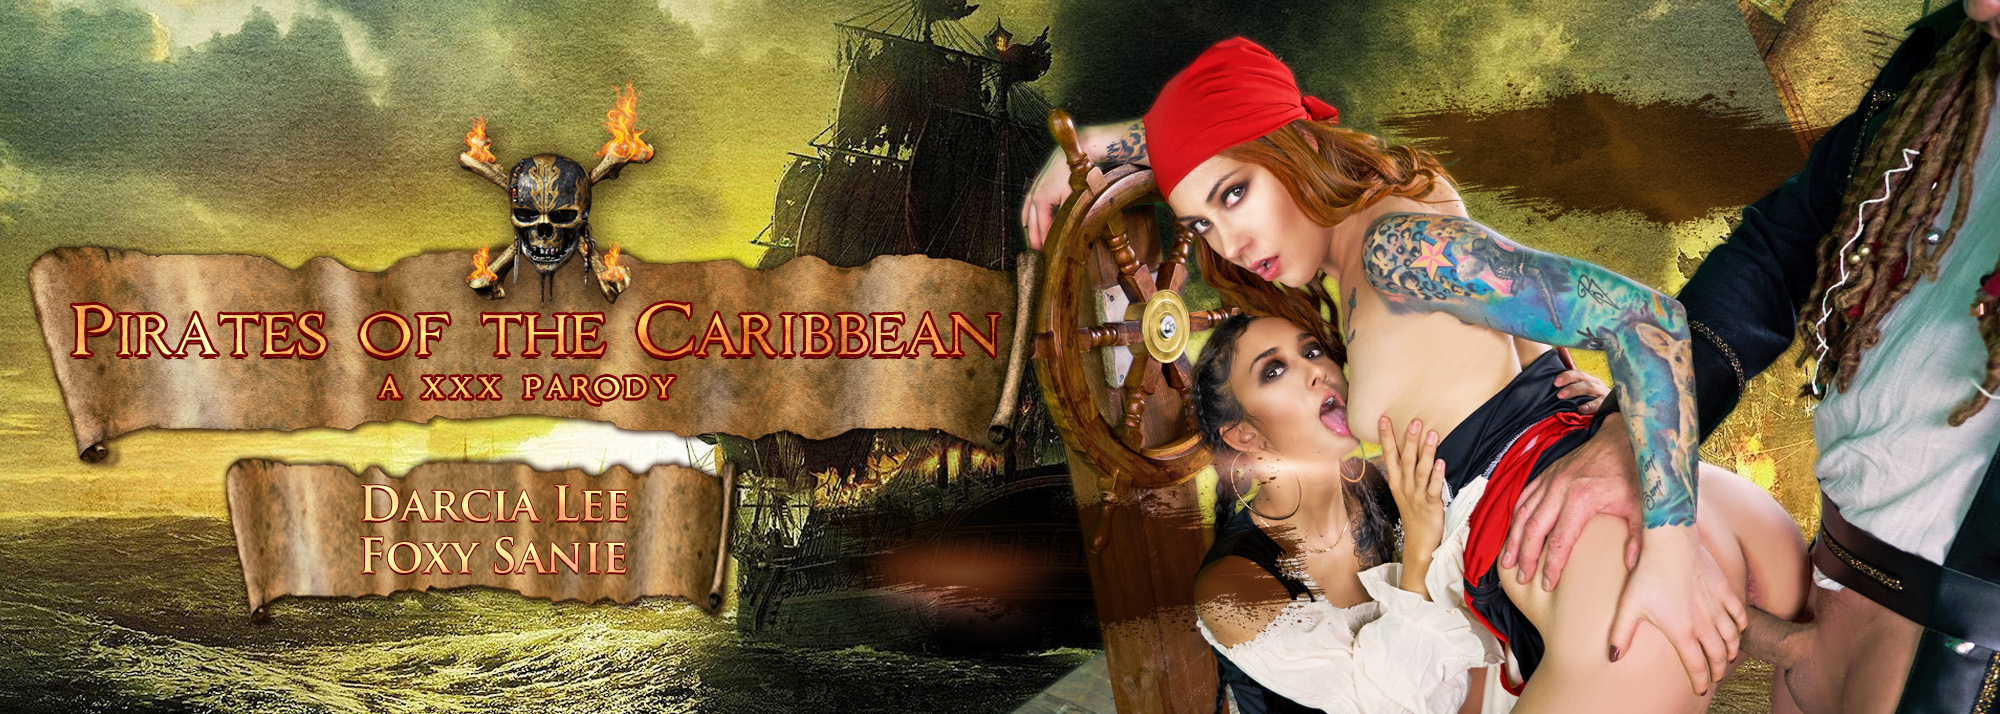 How To Download Pirate Xxx - Pirates of the Caribbean (A XXX Parody) - VR Cosplay Porn | VR Conk